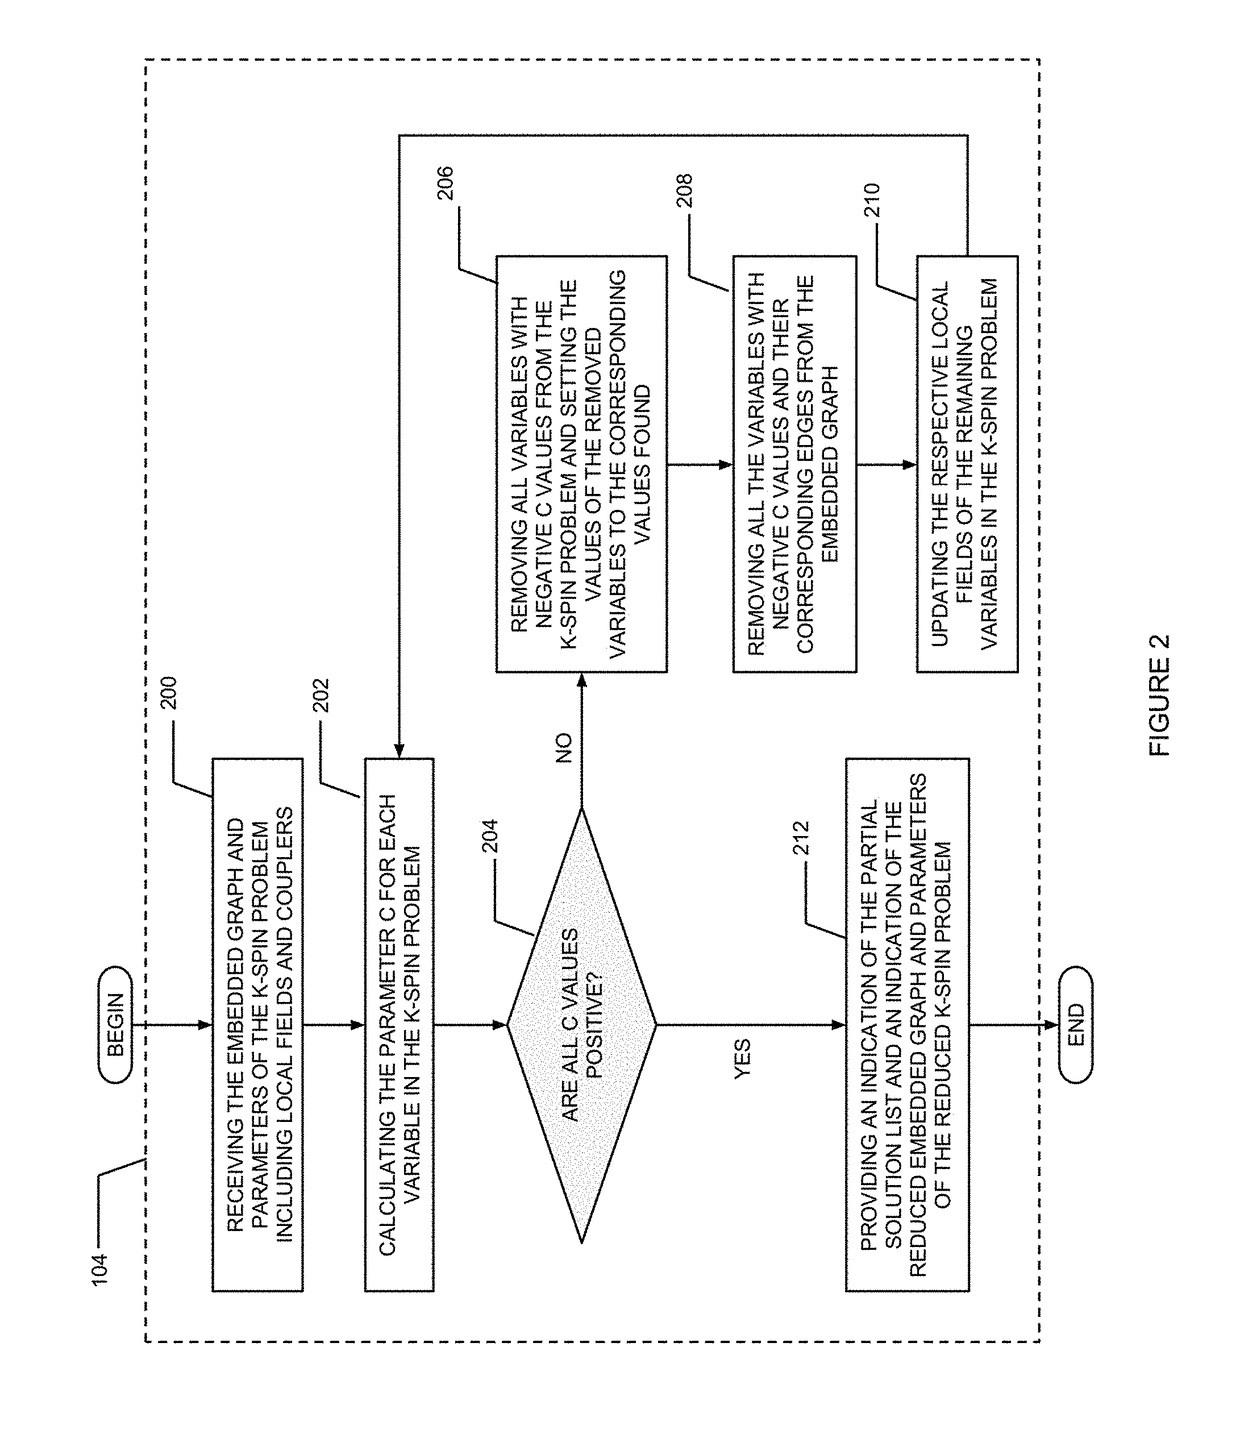 Method and system for setting parameters of a discrete optimization problem embedded to an optimization solver and solving the embedded discrete optimization problem